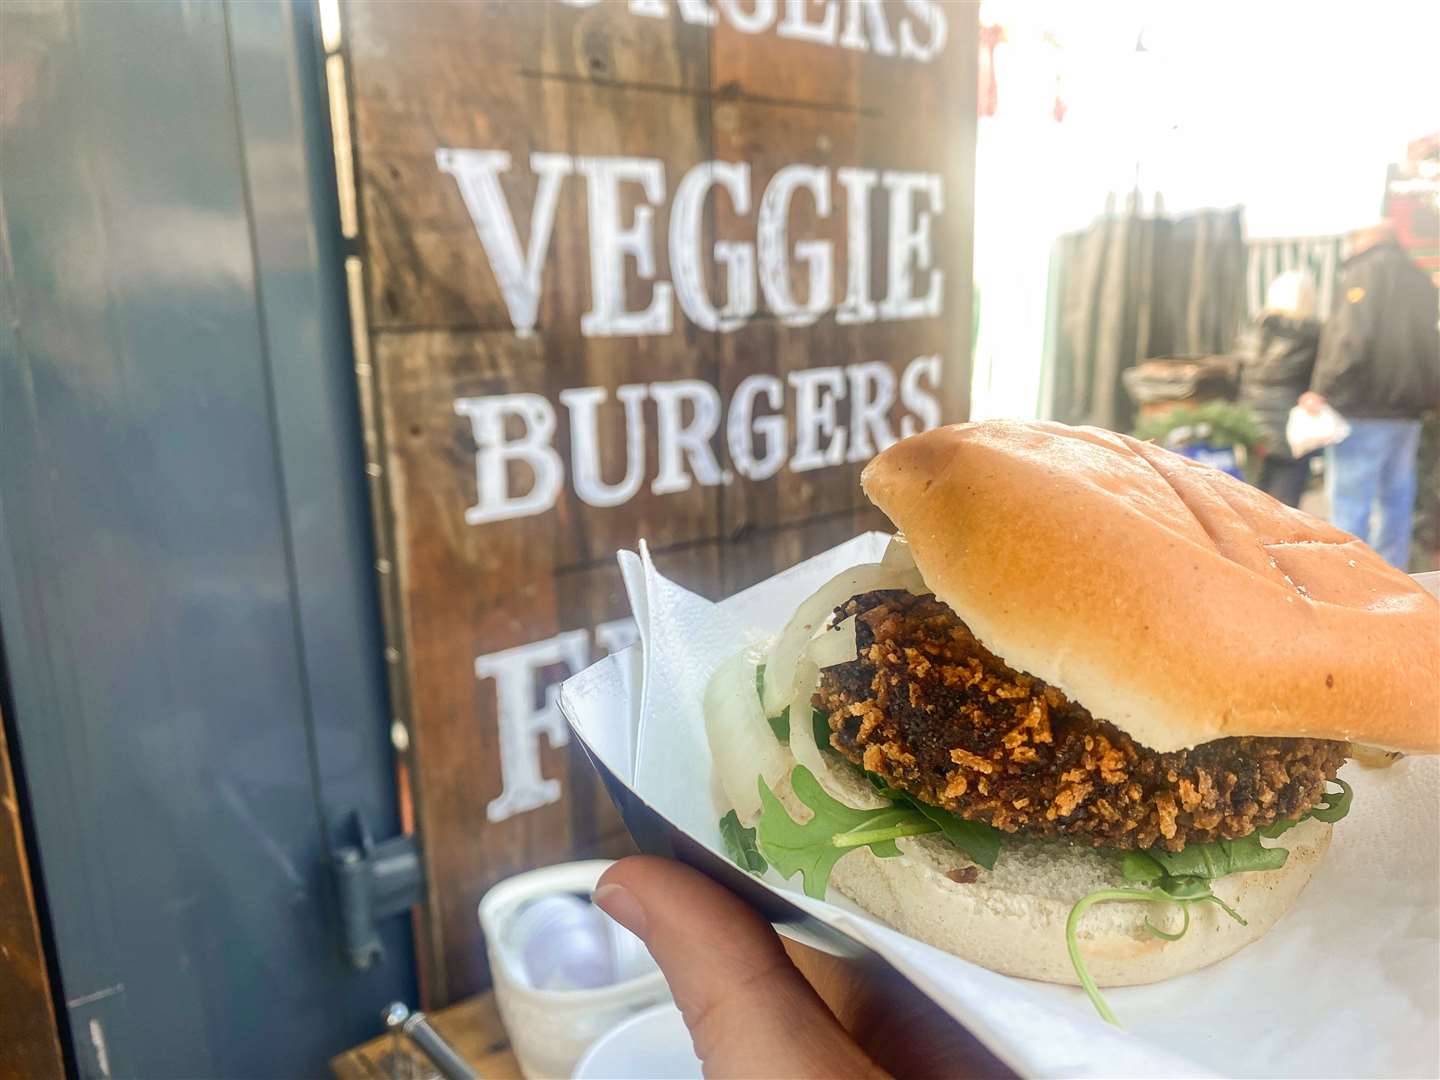 The Mean Burger veggie option was made of flavoursome beetroot, peppers and quinoa